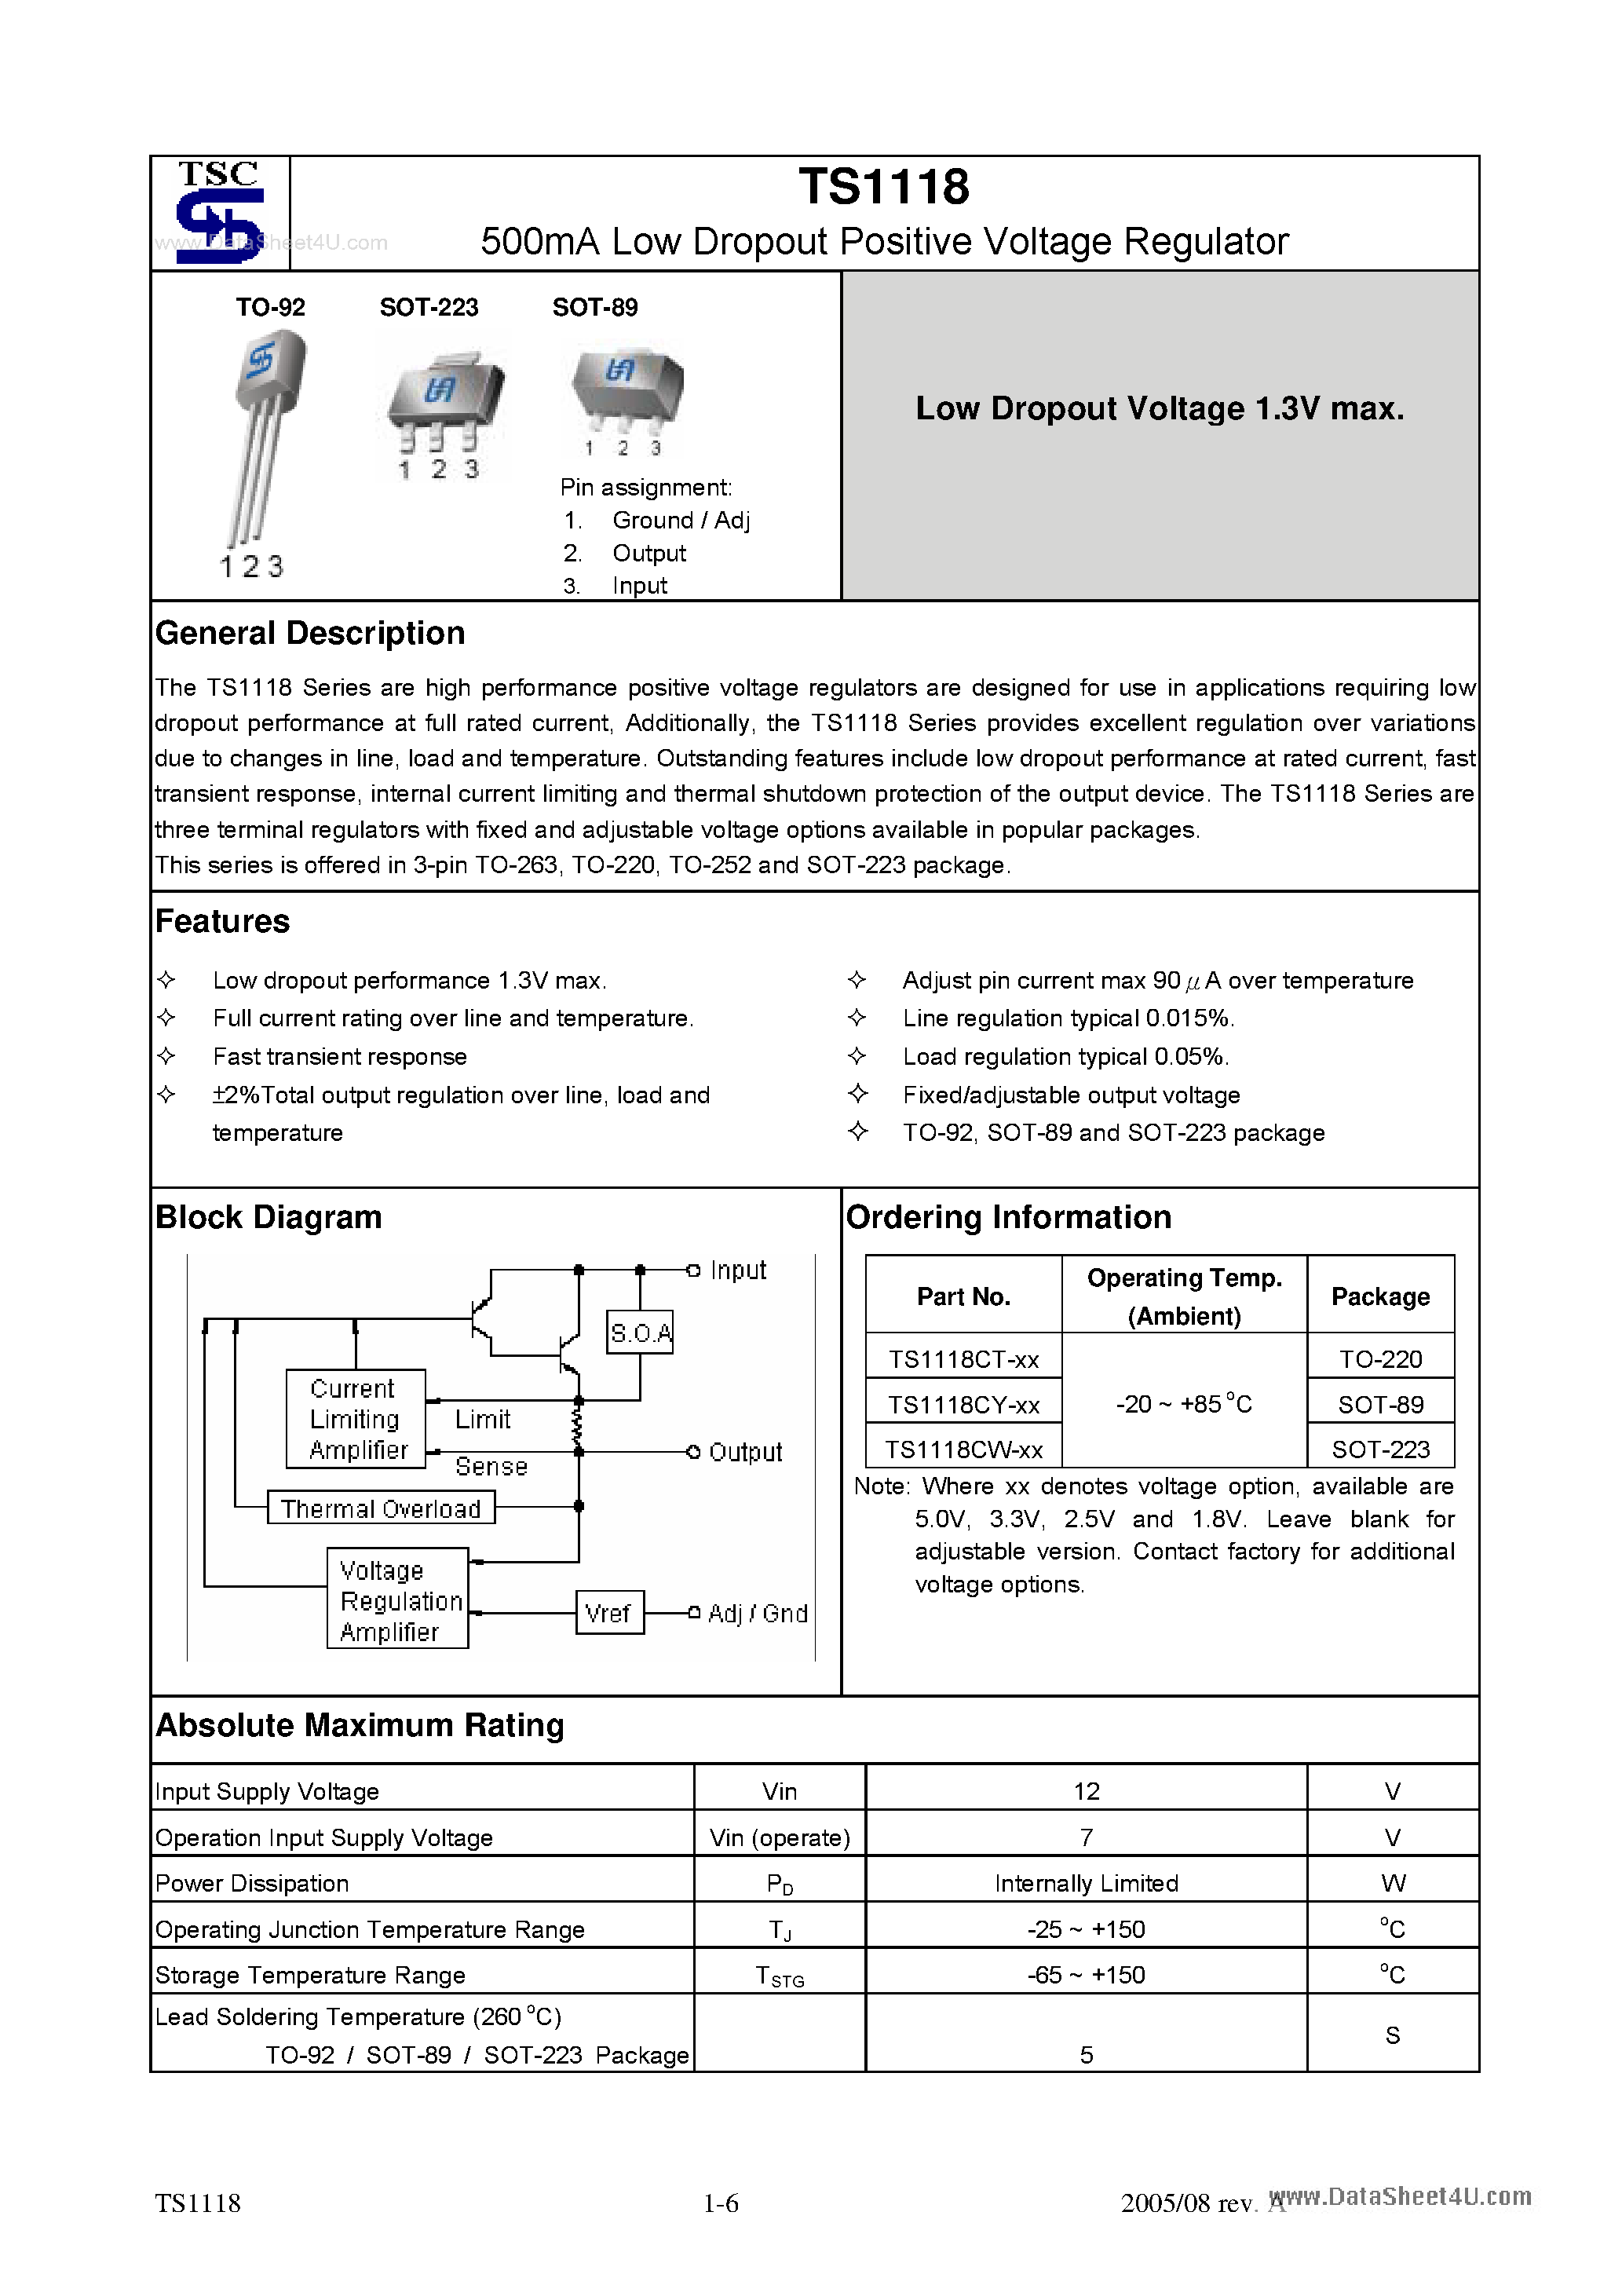 Datasheet TS1118 - 500mA Low Dropout Positive Voltage Regulator page 1